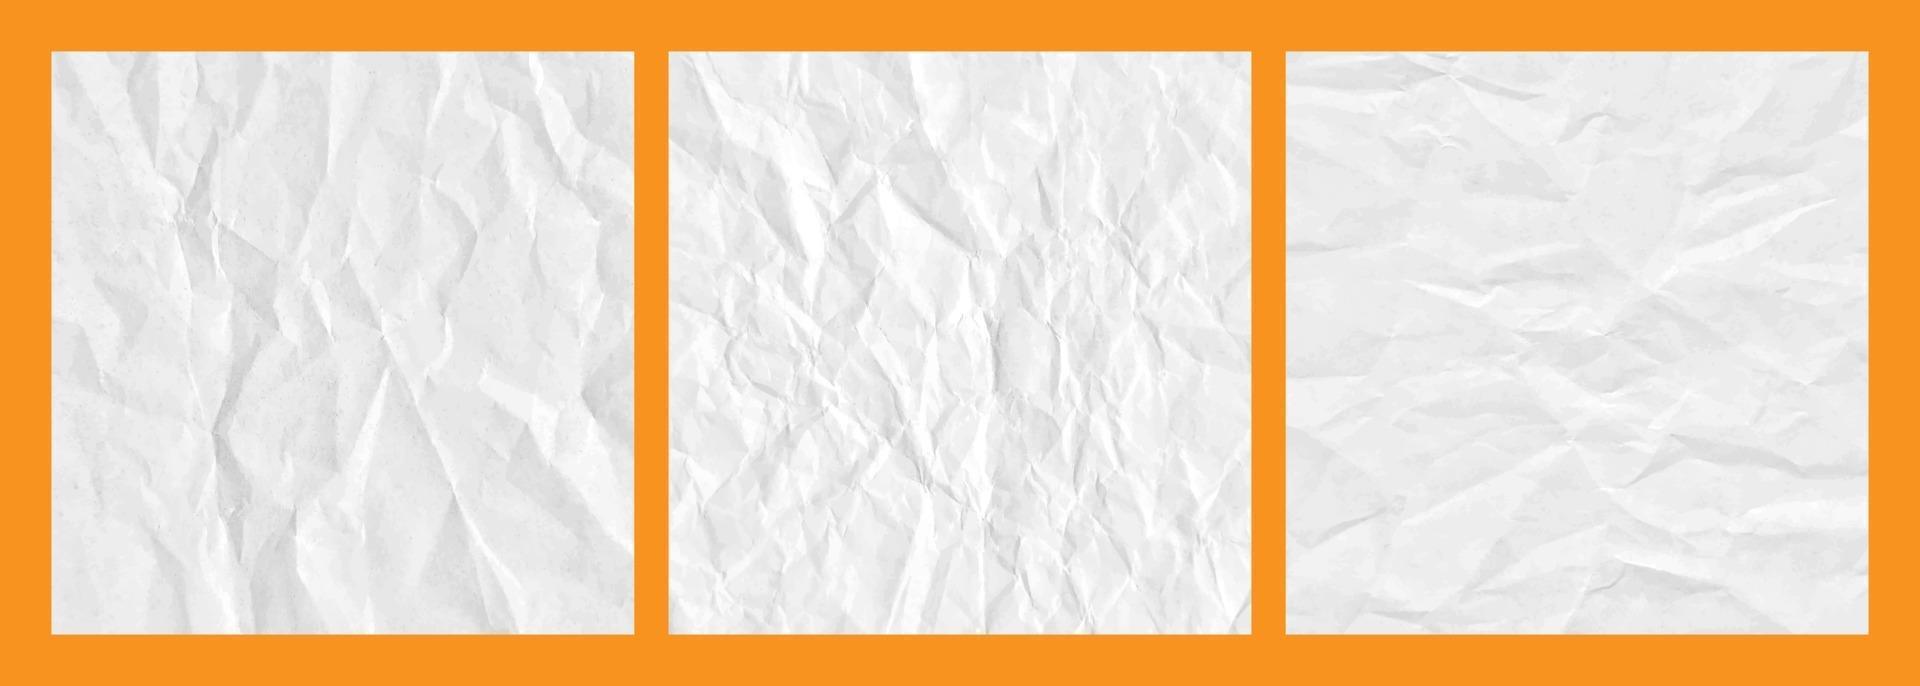 Realistic crumpled white paper texture background set vector